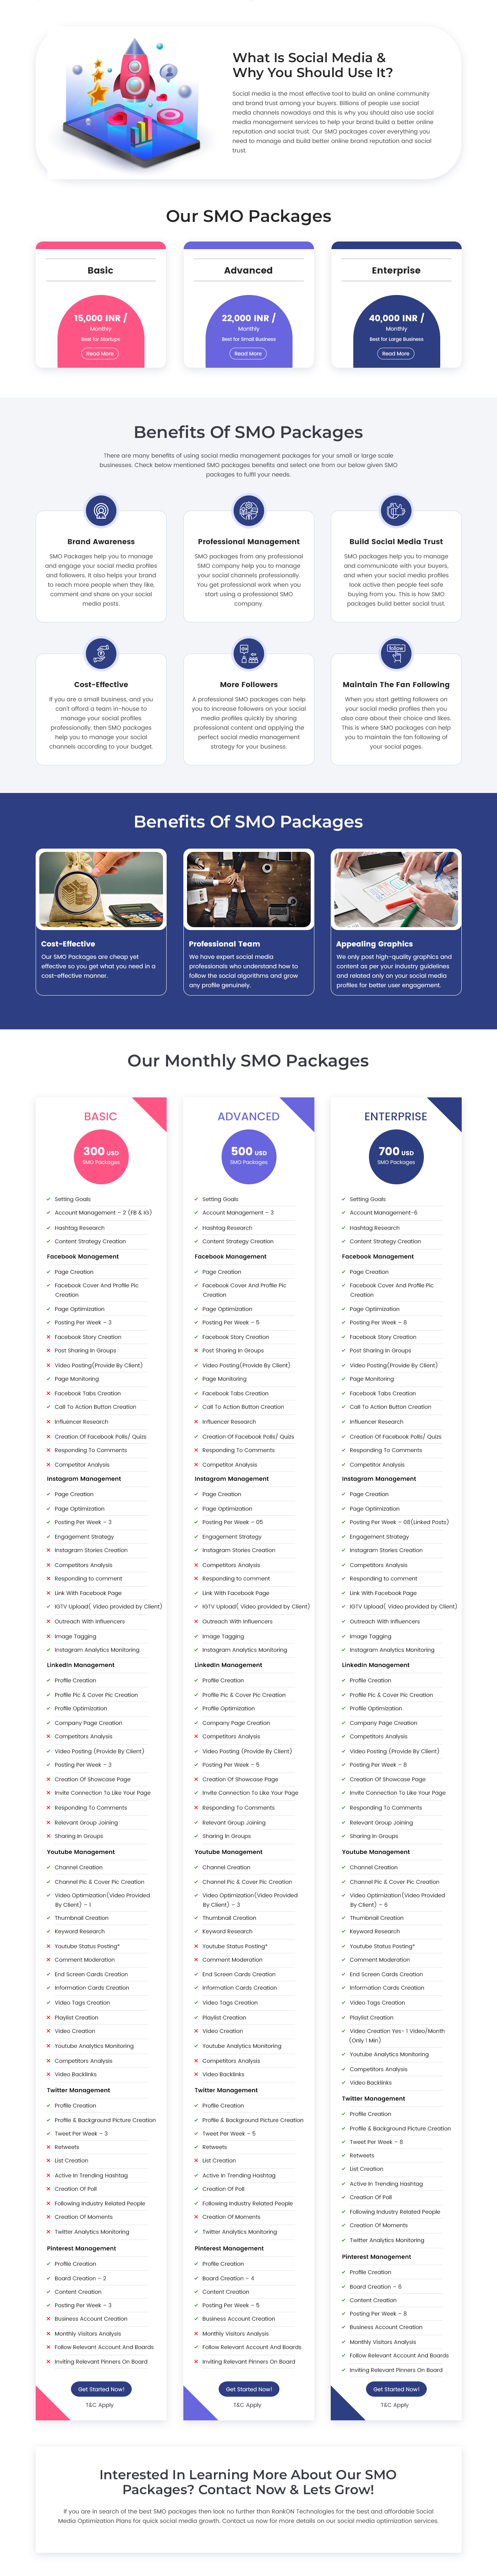 smo packages